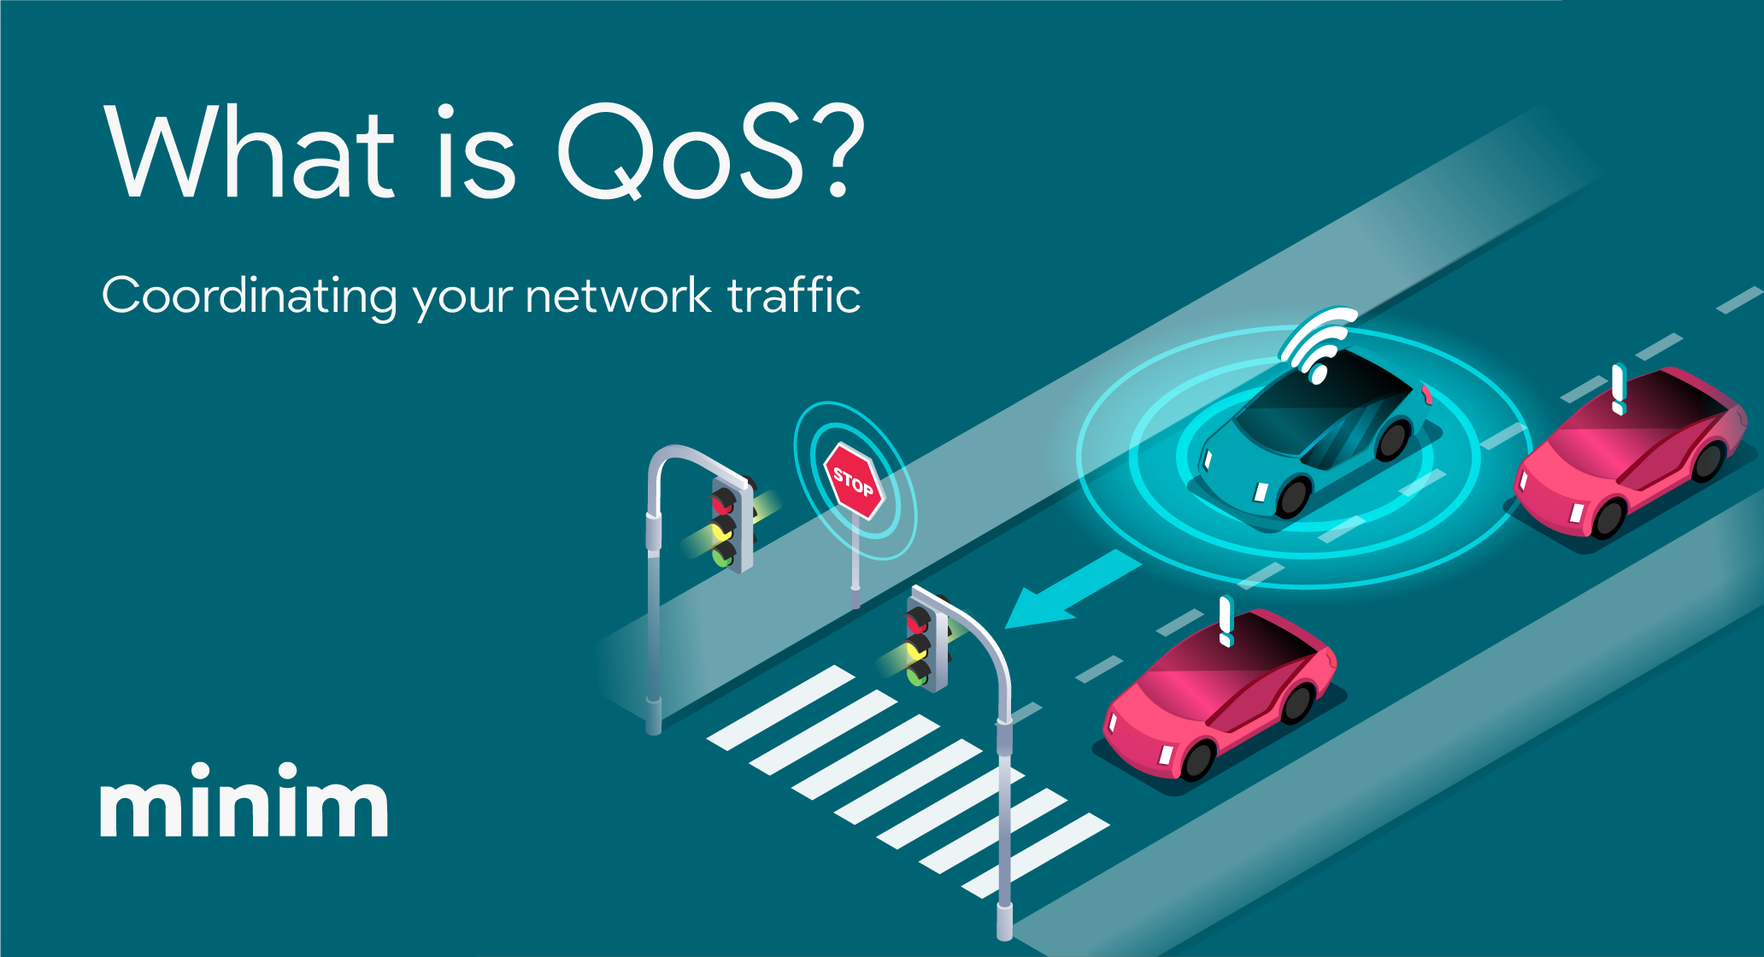 <img src="minim-logo-and-cars-in-traffic-with-stop-sign-ahead.jpg" alt="Home network QoS and how it schedules network traffic for smart home control">